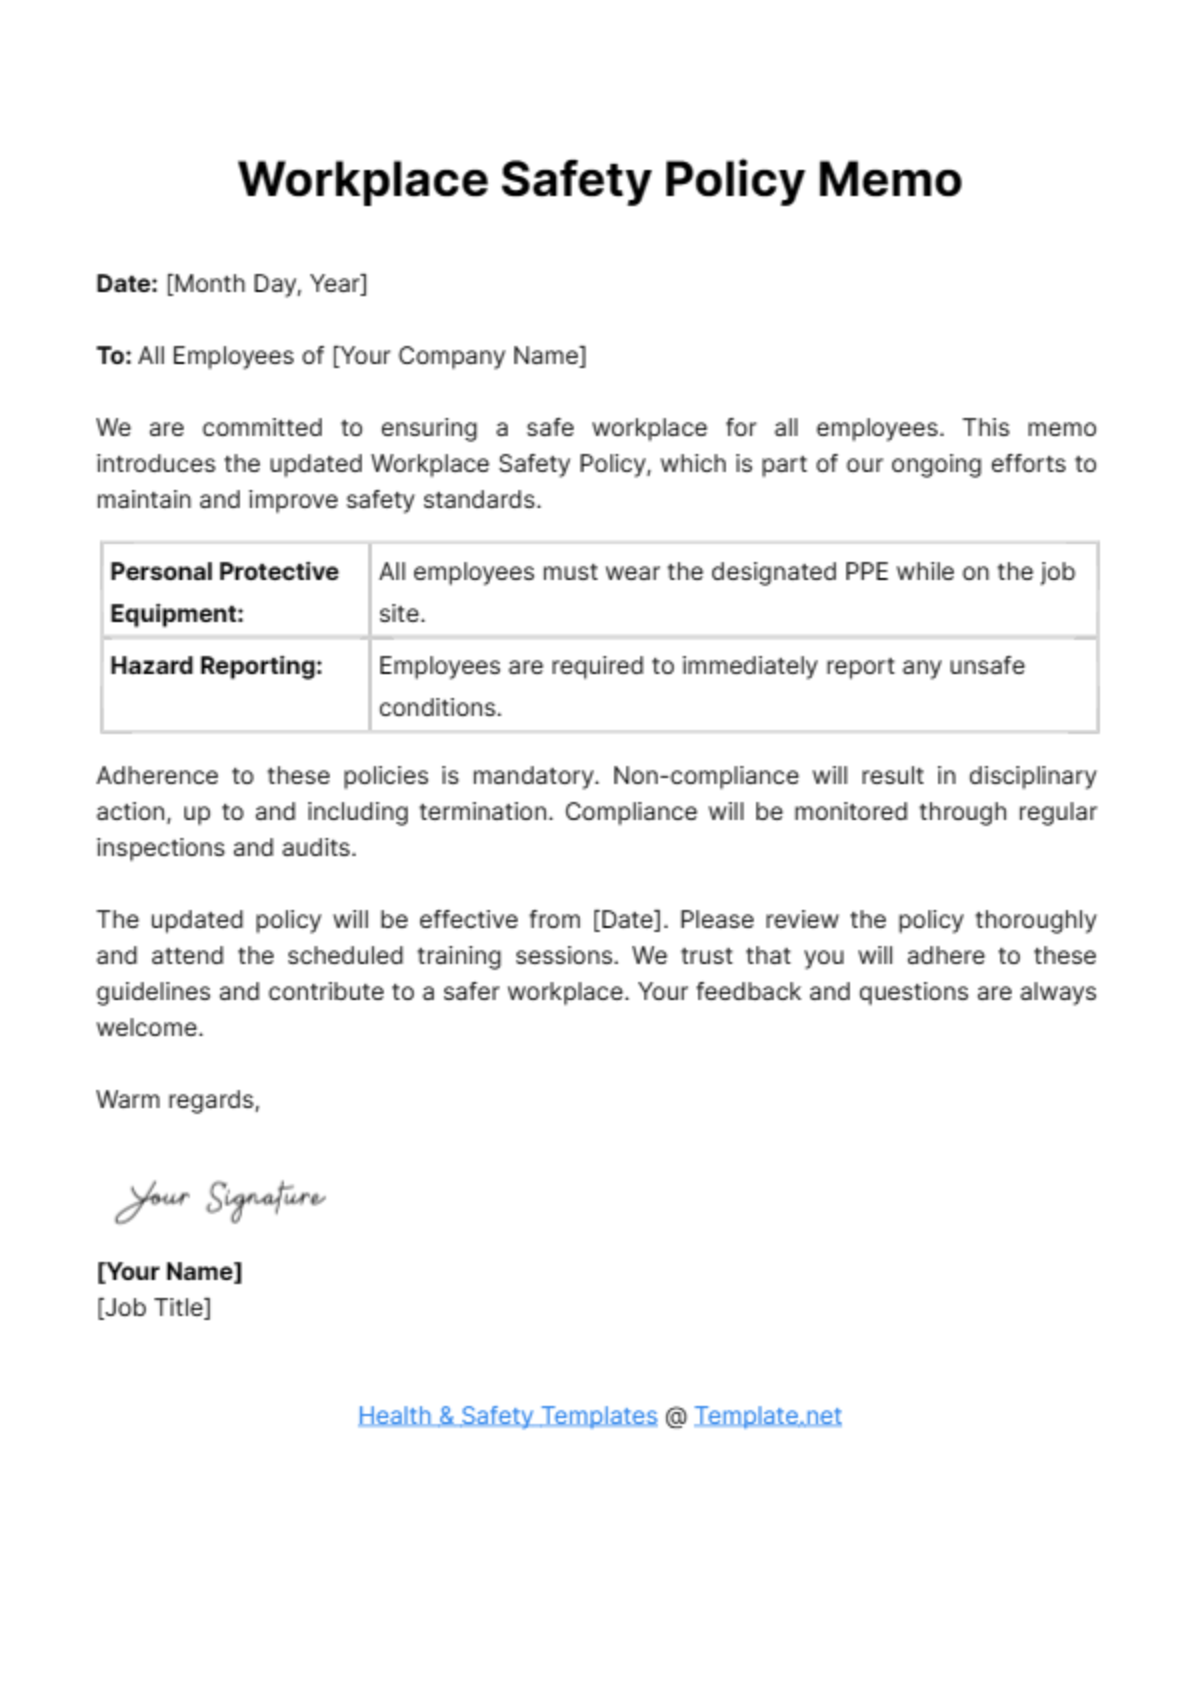 Workplace Safety Policy Memo Template